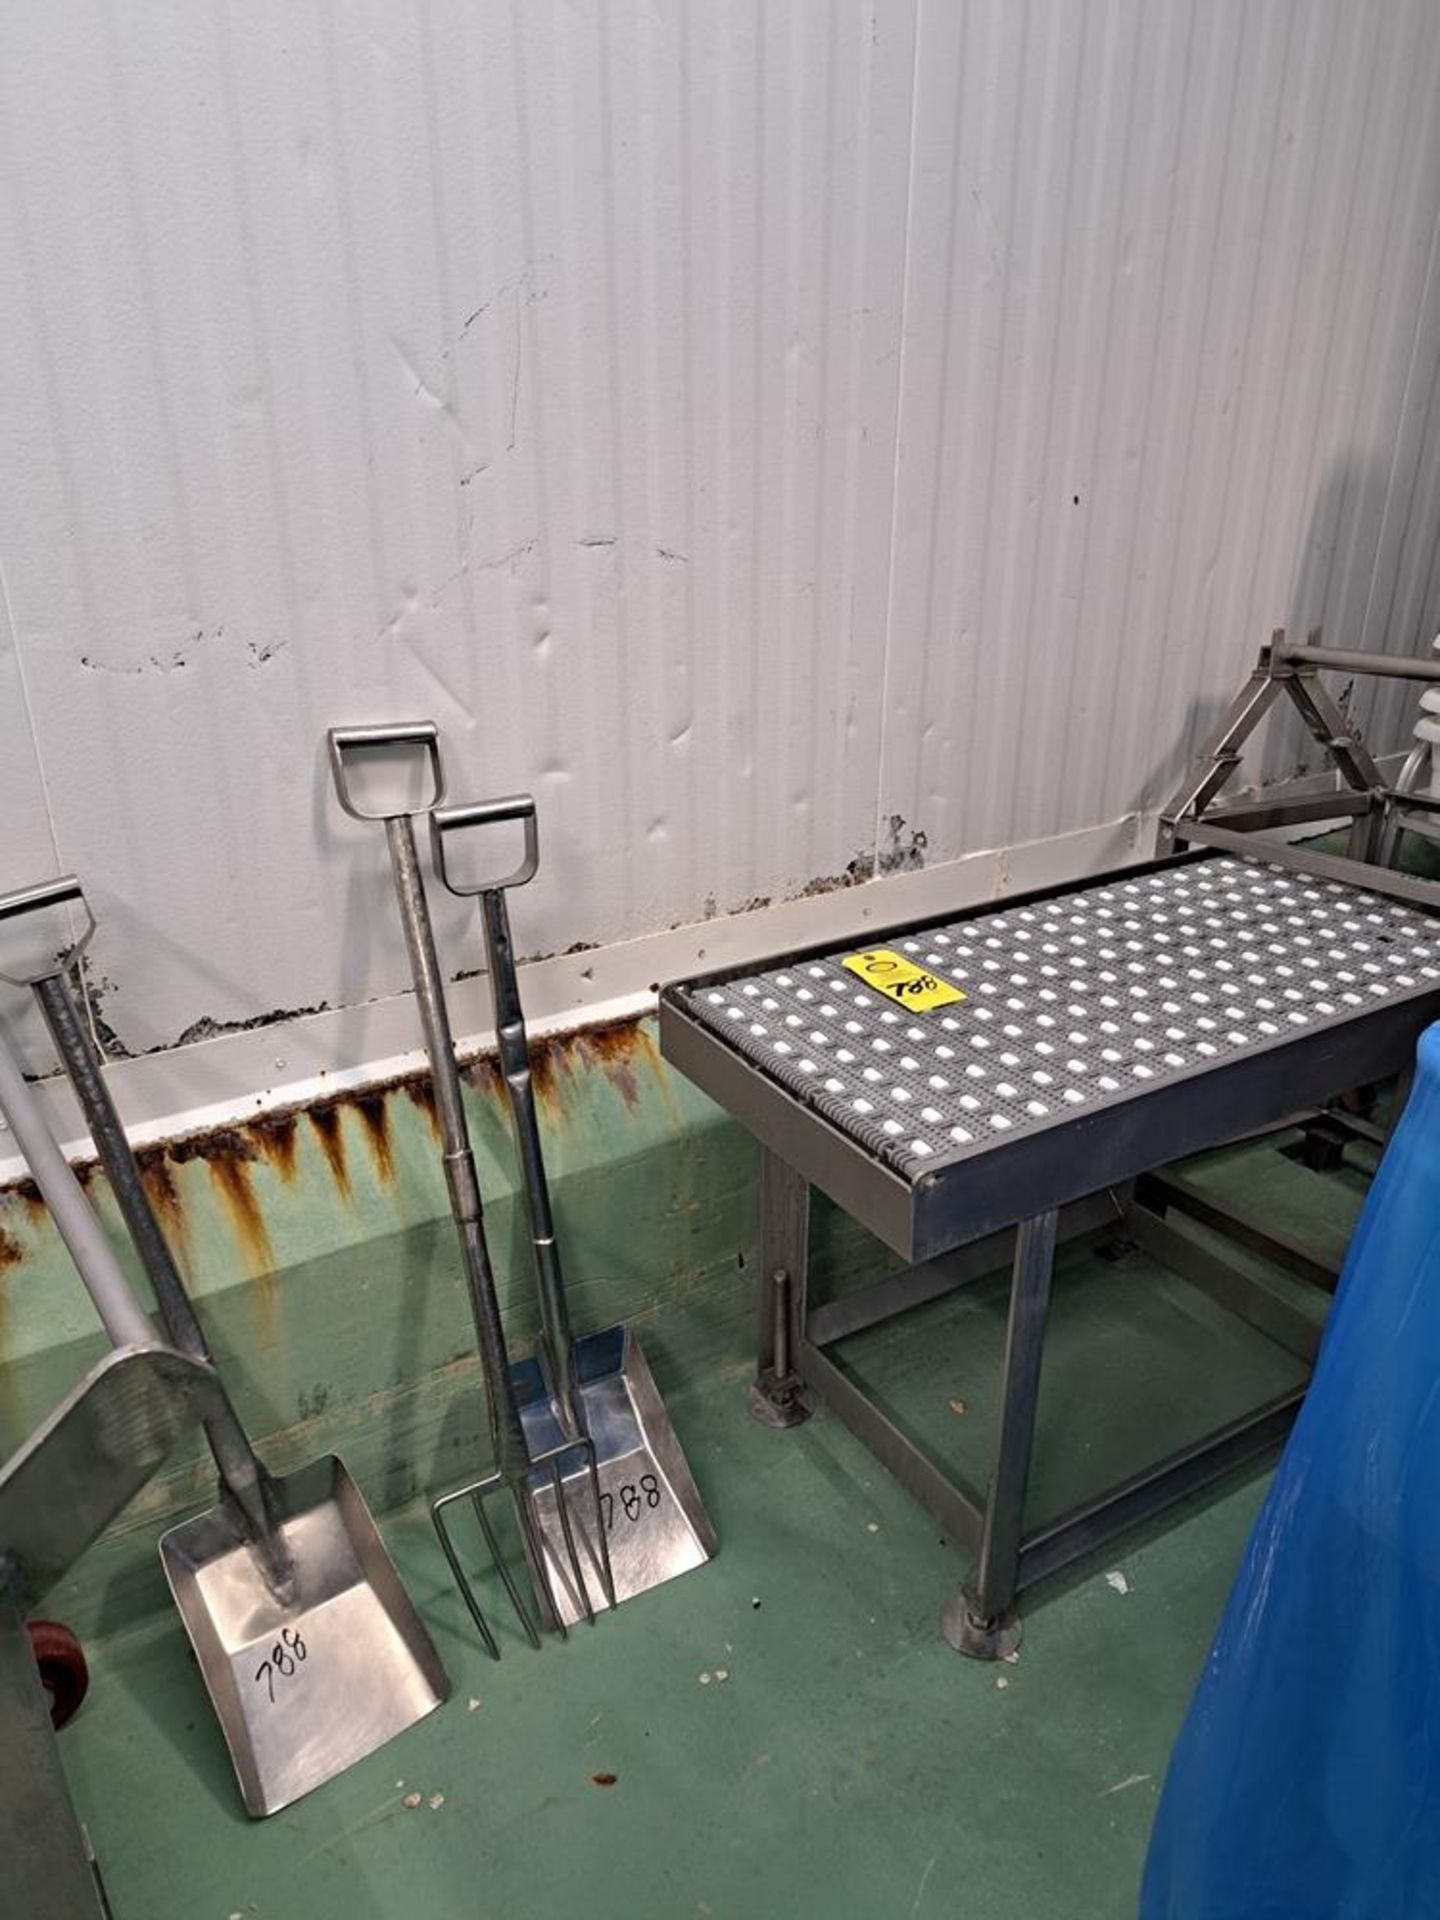 Lot (2) Stainless Steel Table, 18" W X 24" L, (3) Portable Bag Holders, Stainless Steel Cabinet, 16" - Image 6 of 7